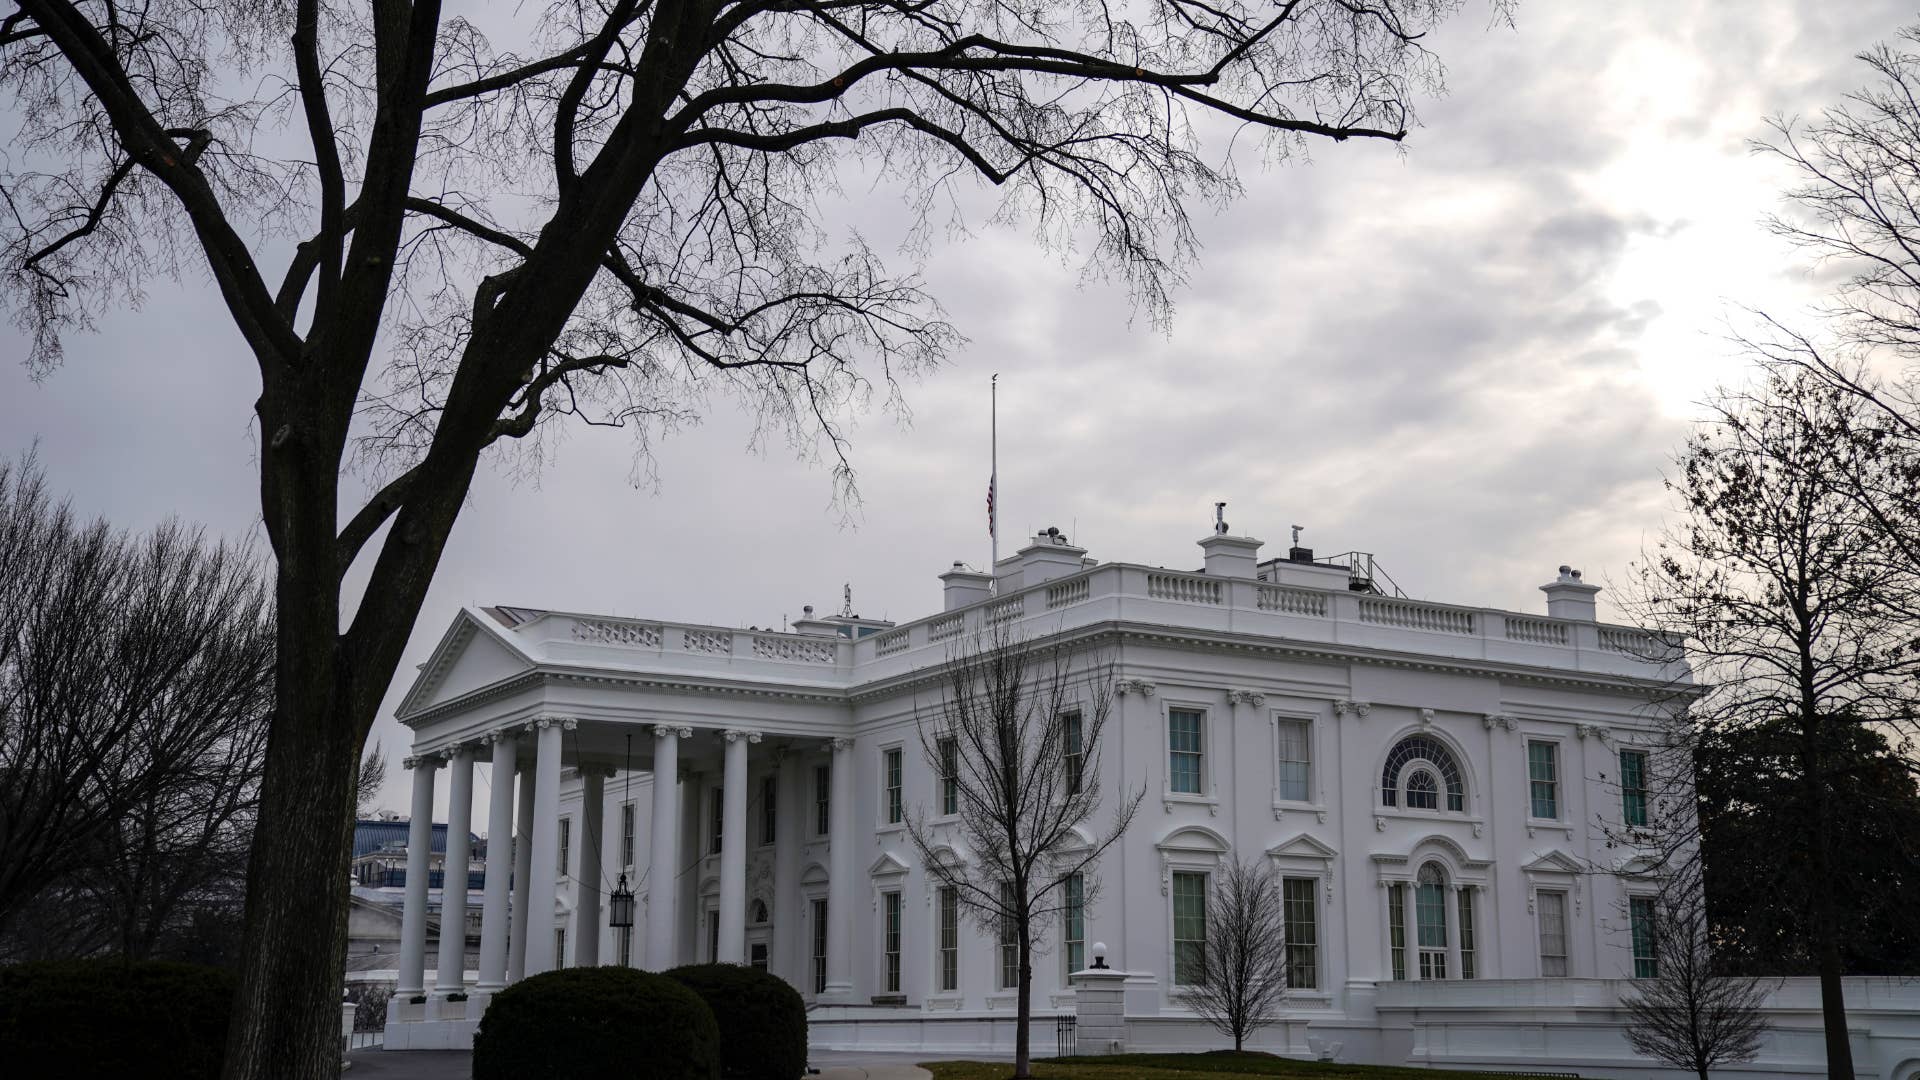 American flag flies at half staff over the White House.